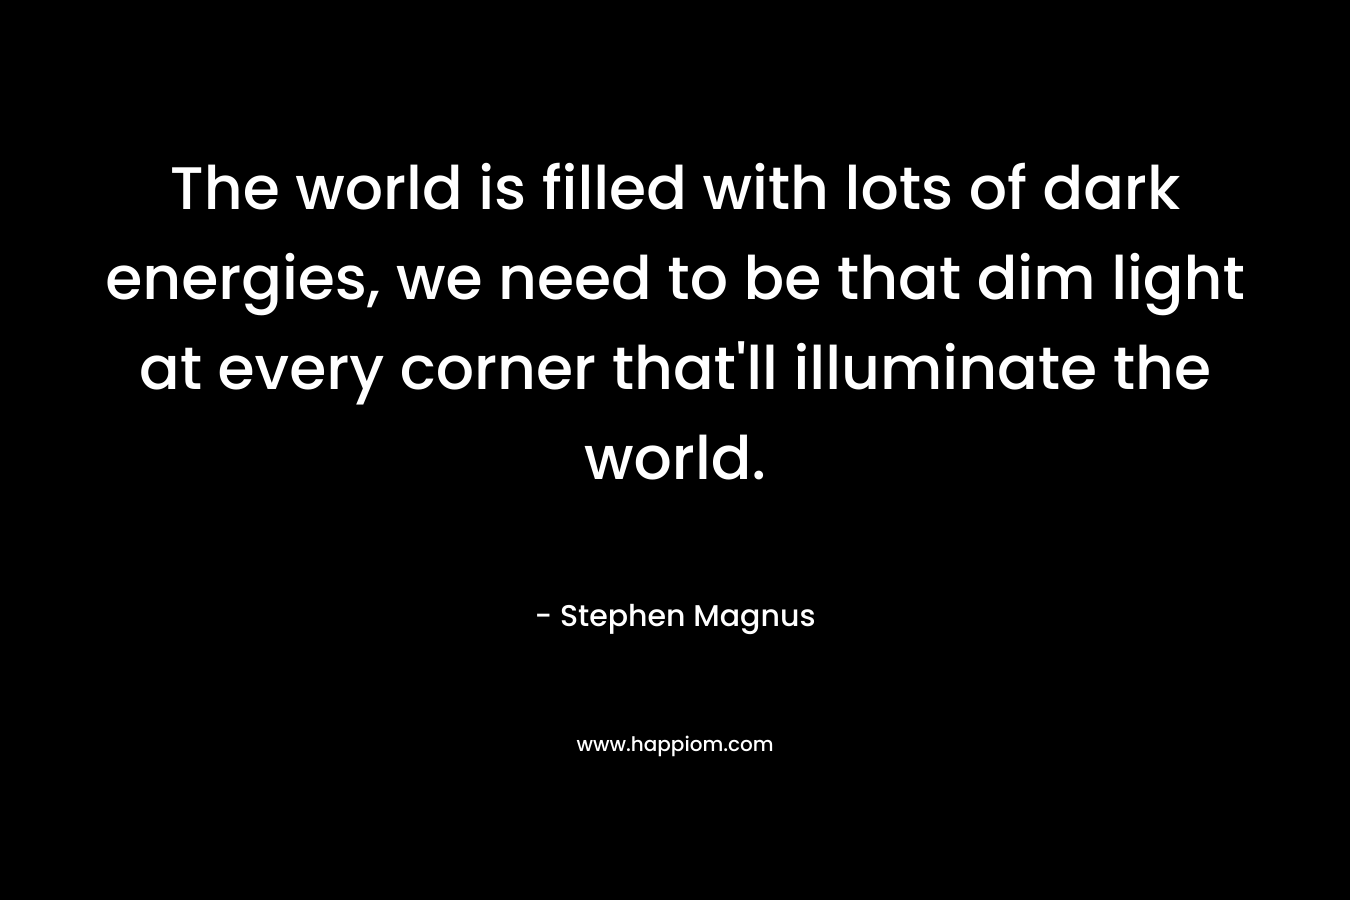 The world is filled with lots of dark energies, we need to be that dim light at every corner that'll illuminate the world.